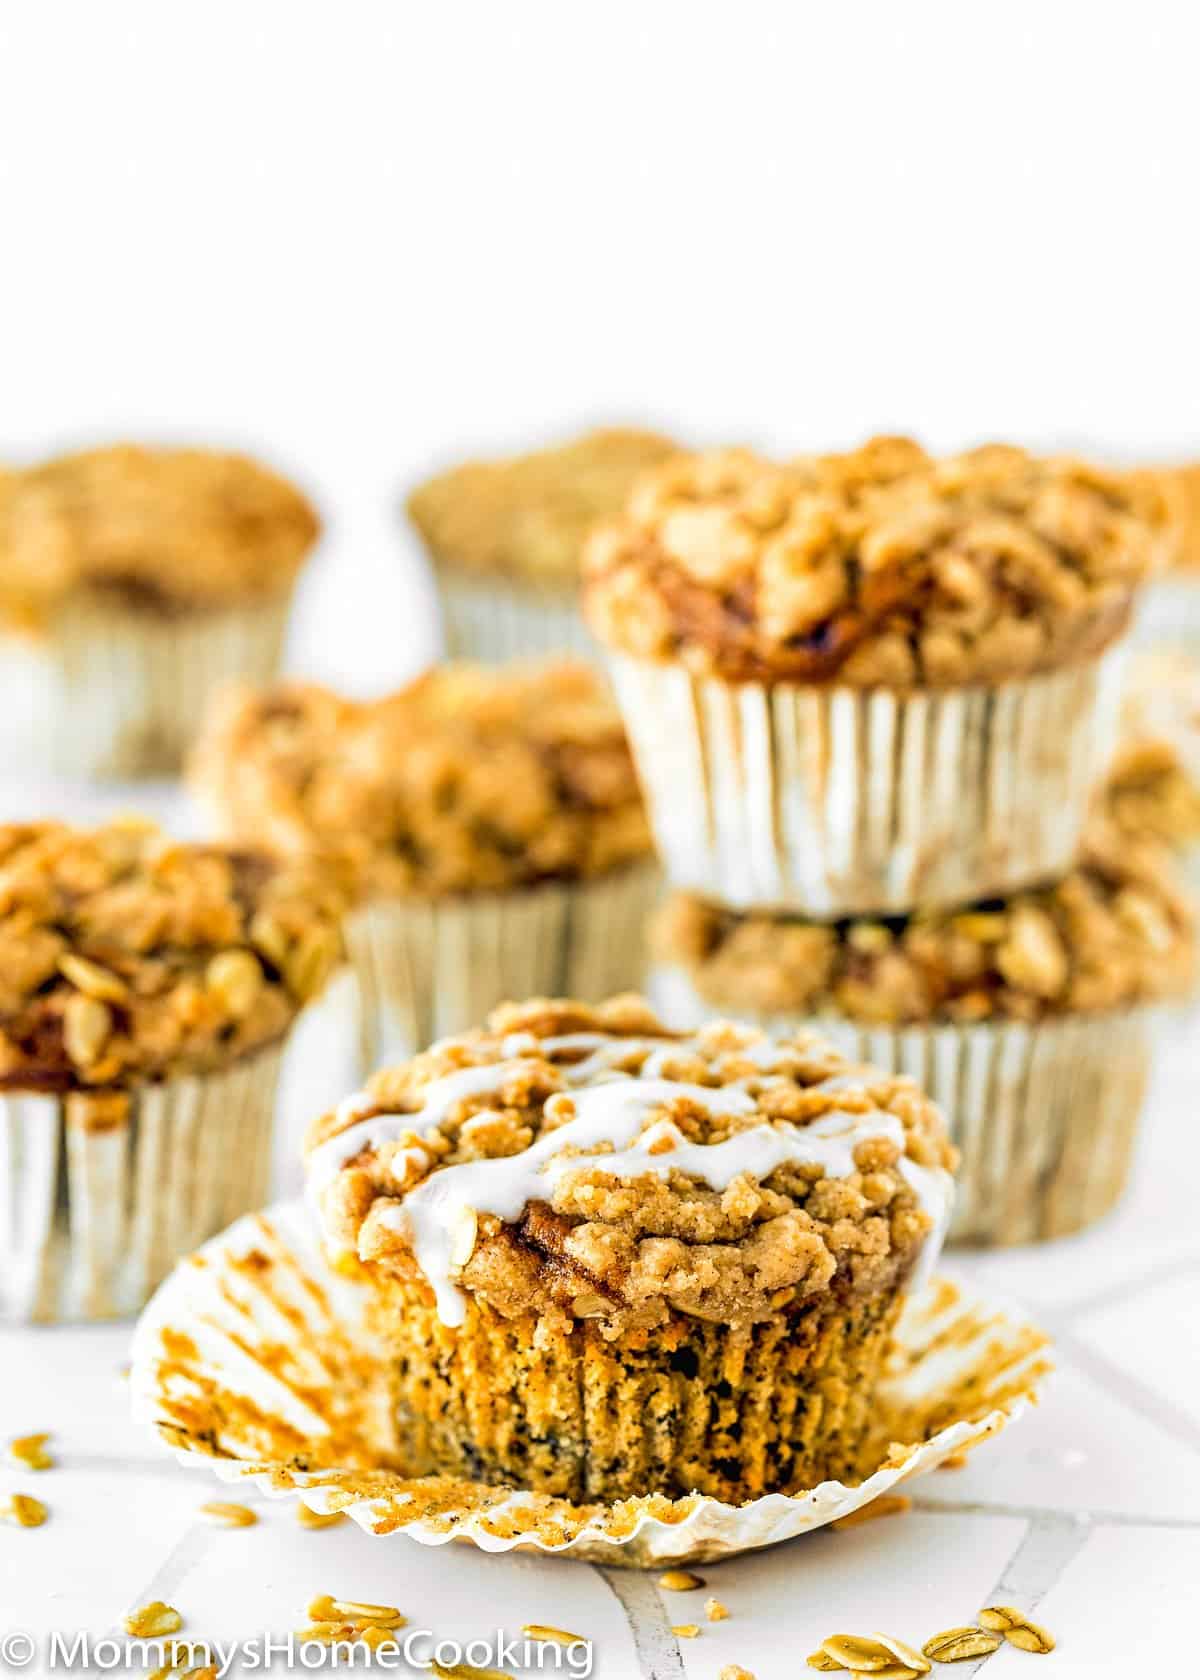 Eggless Banana Crumb Muffins with sugar glaze over a white surface.